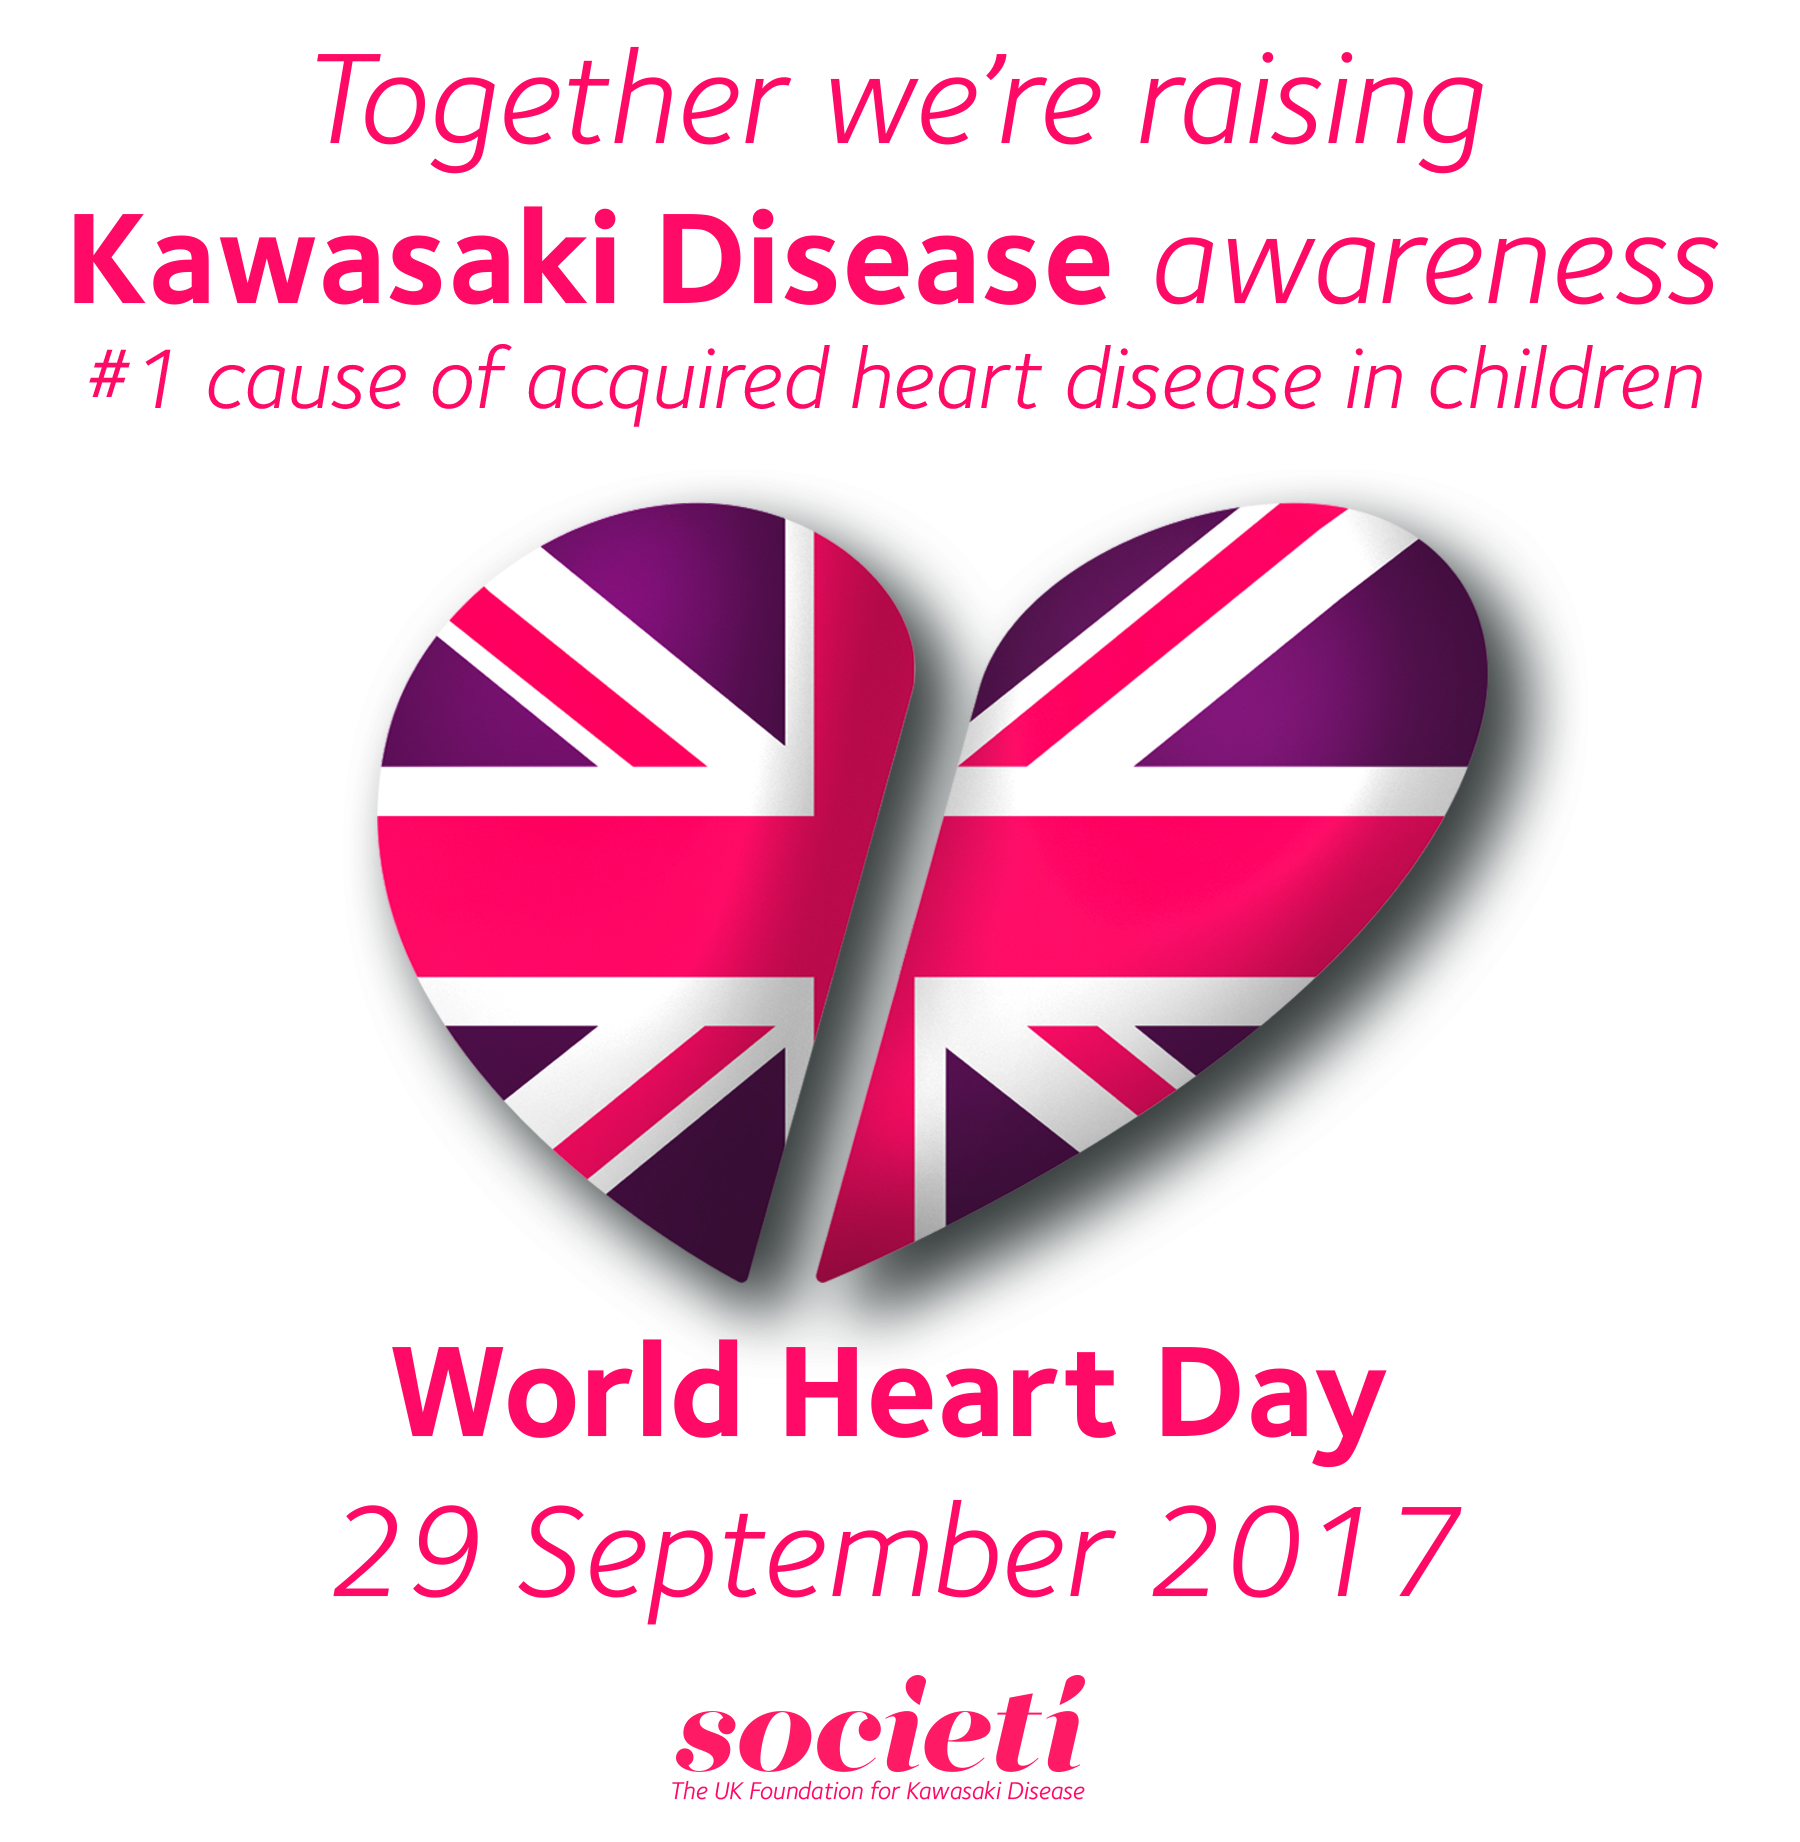 Children’s hearts at risk because of lack of knowledge of Kawasaki Disease